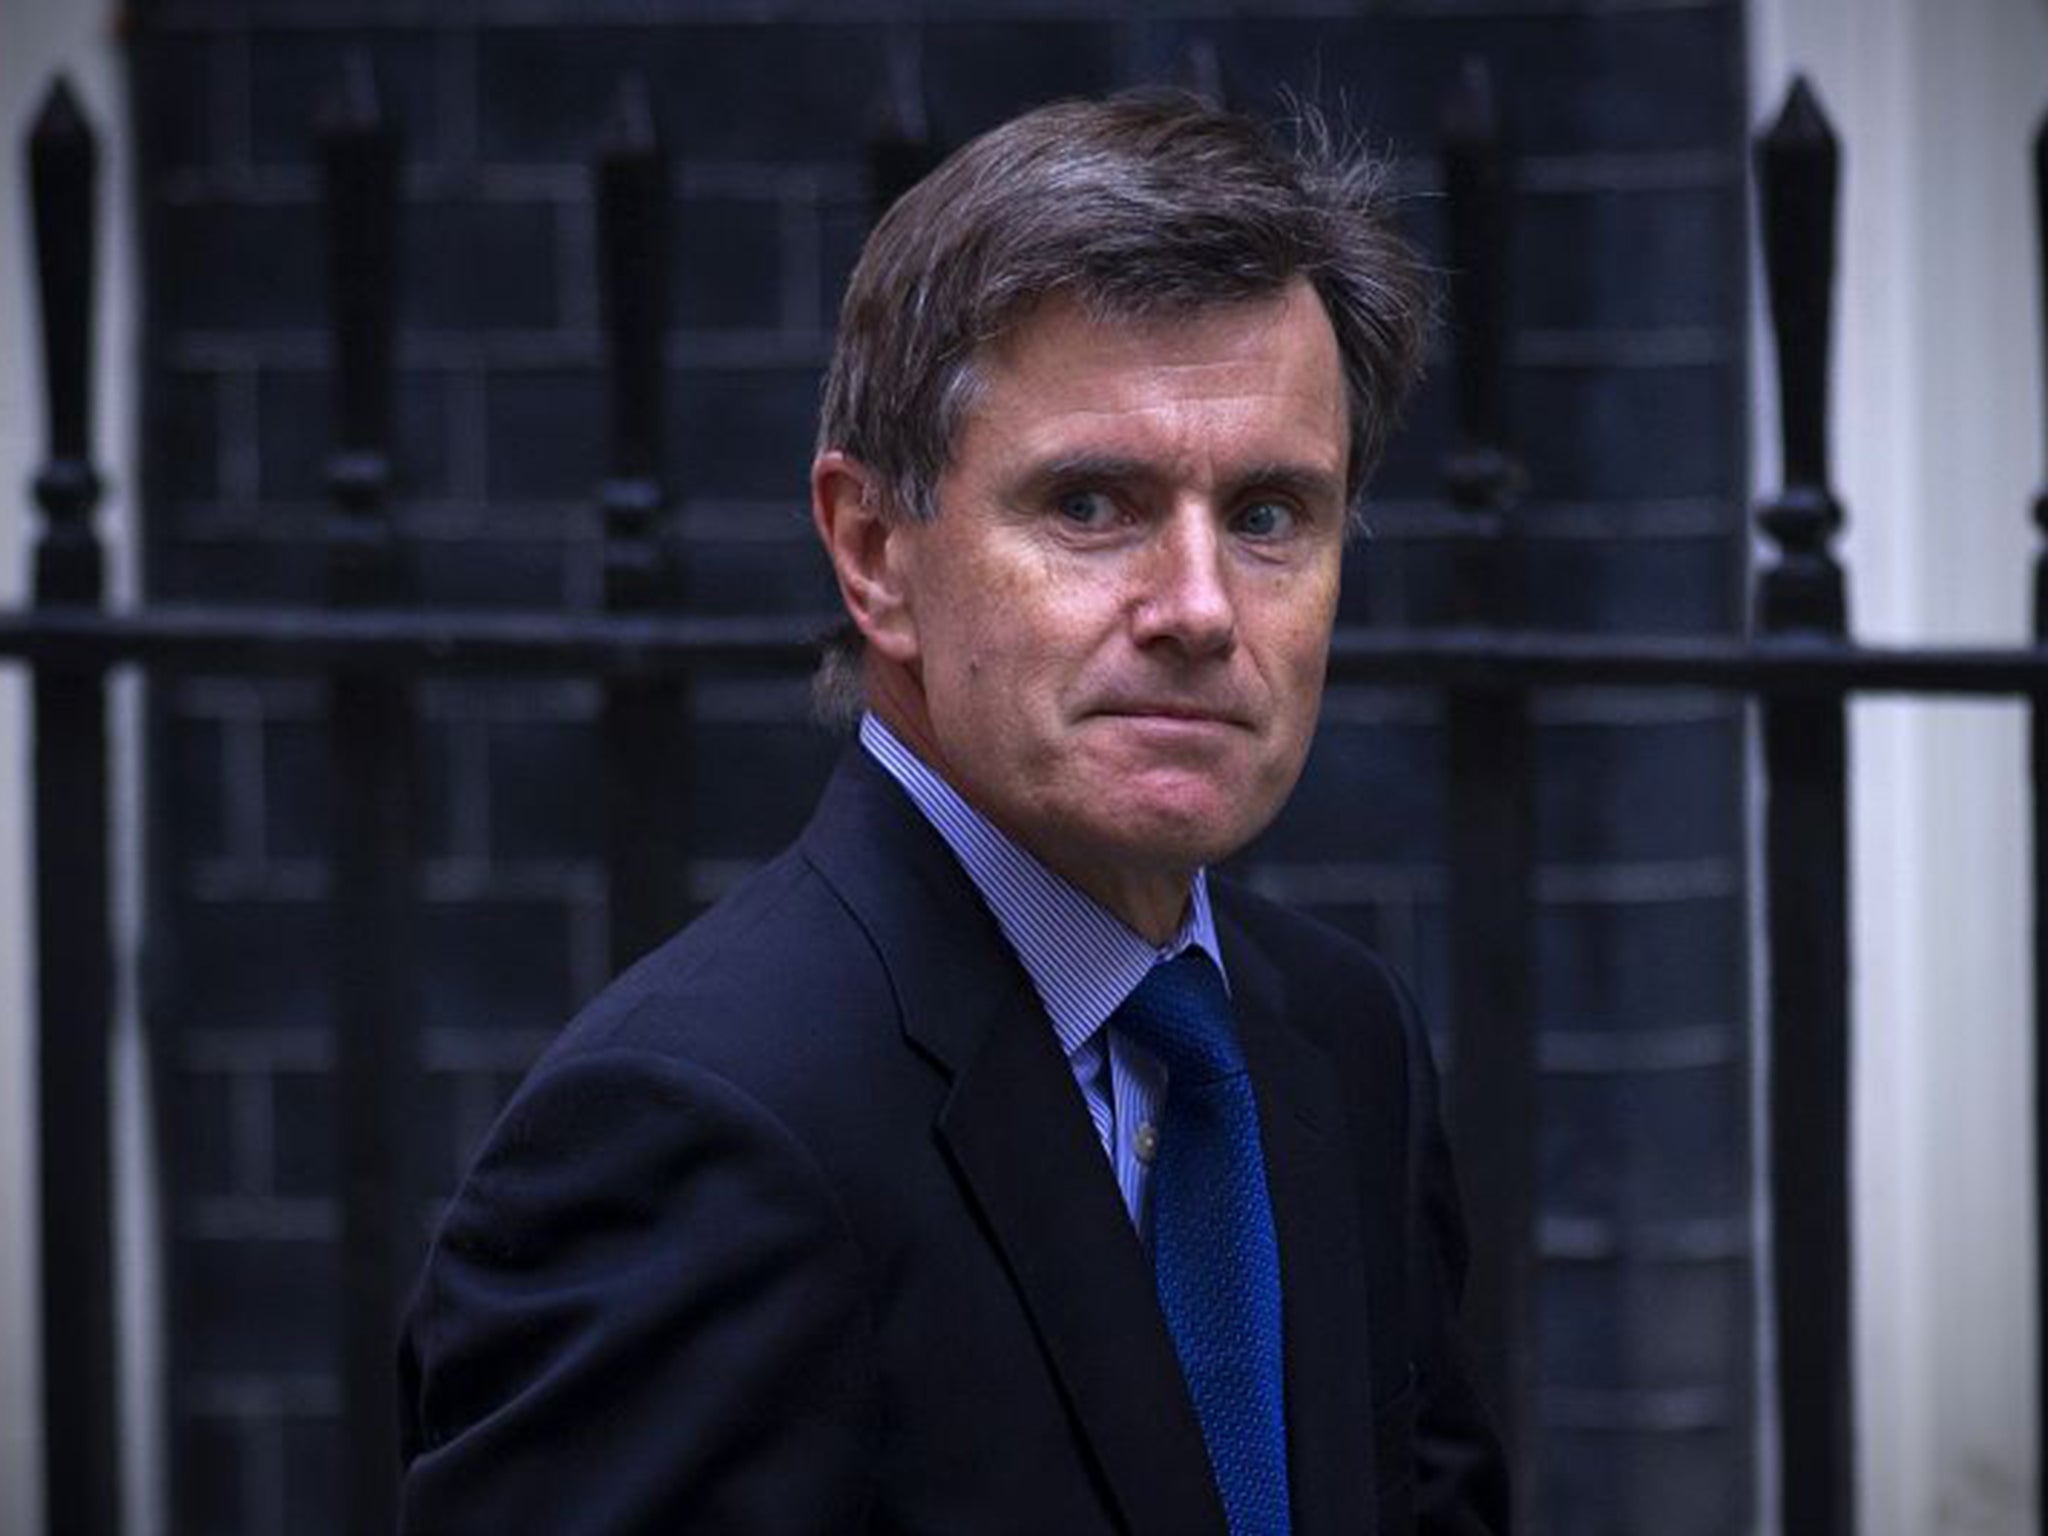 Sir John Sawers has advised increasing defence spending to counter the security threat posed by Russian aggression (AFP/Getty)